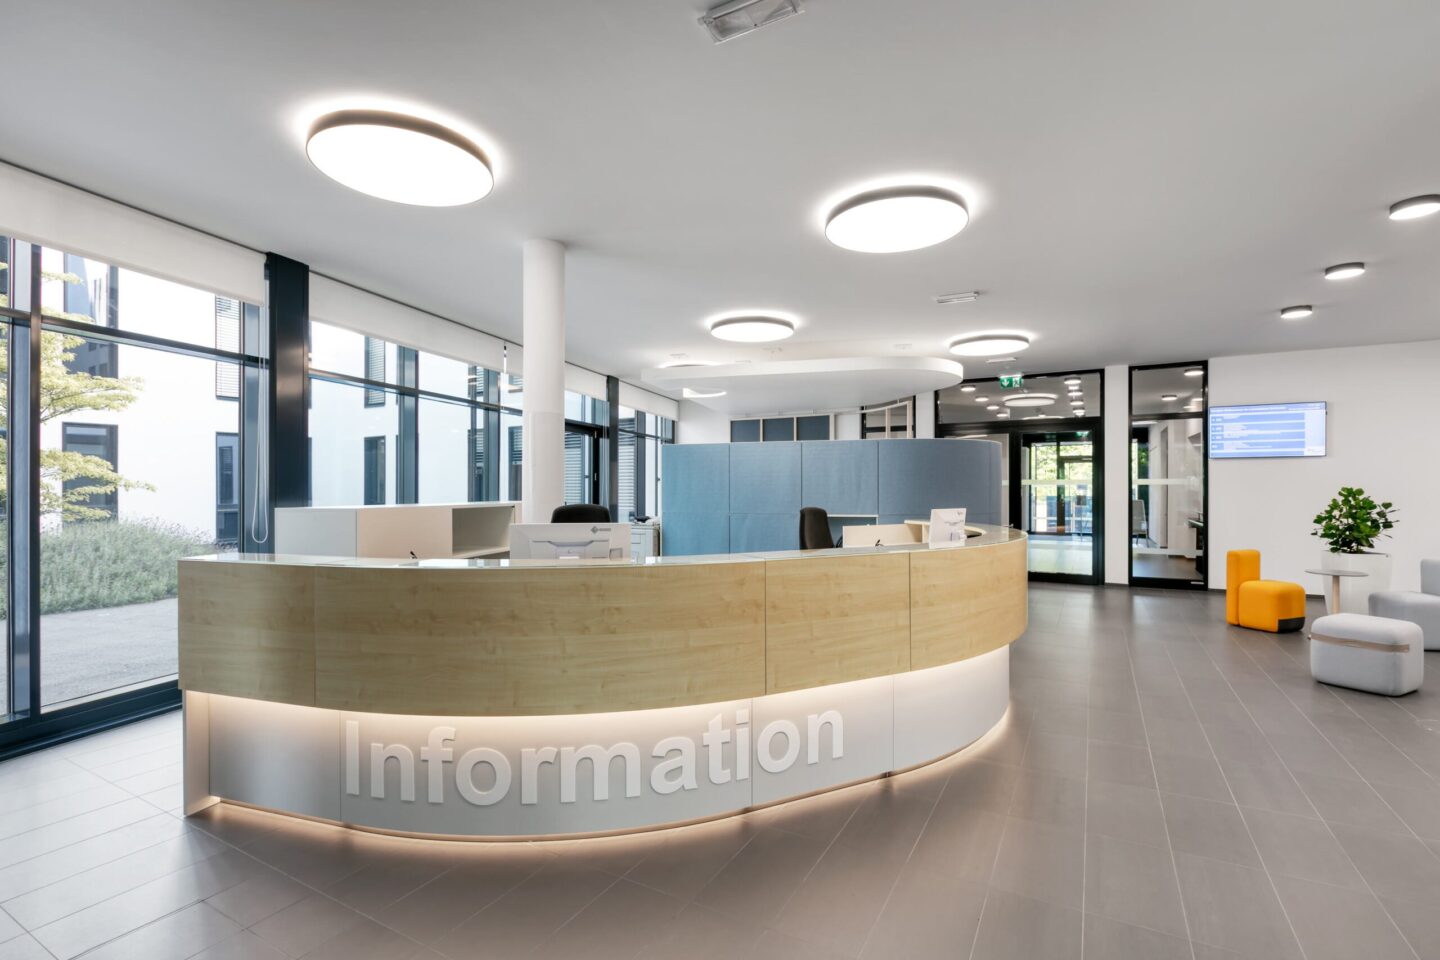 Landratsamt Karlsruhe │ friendly reception zone │ consultation zone with acoustic ceiling